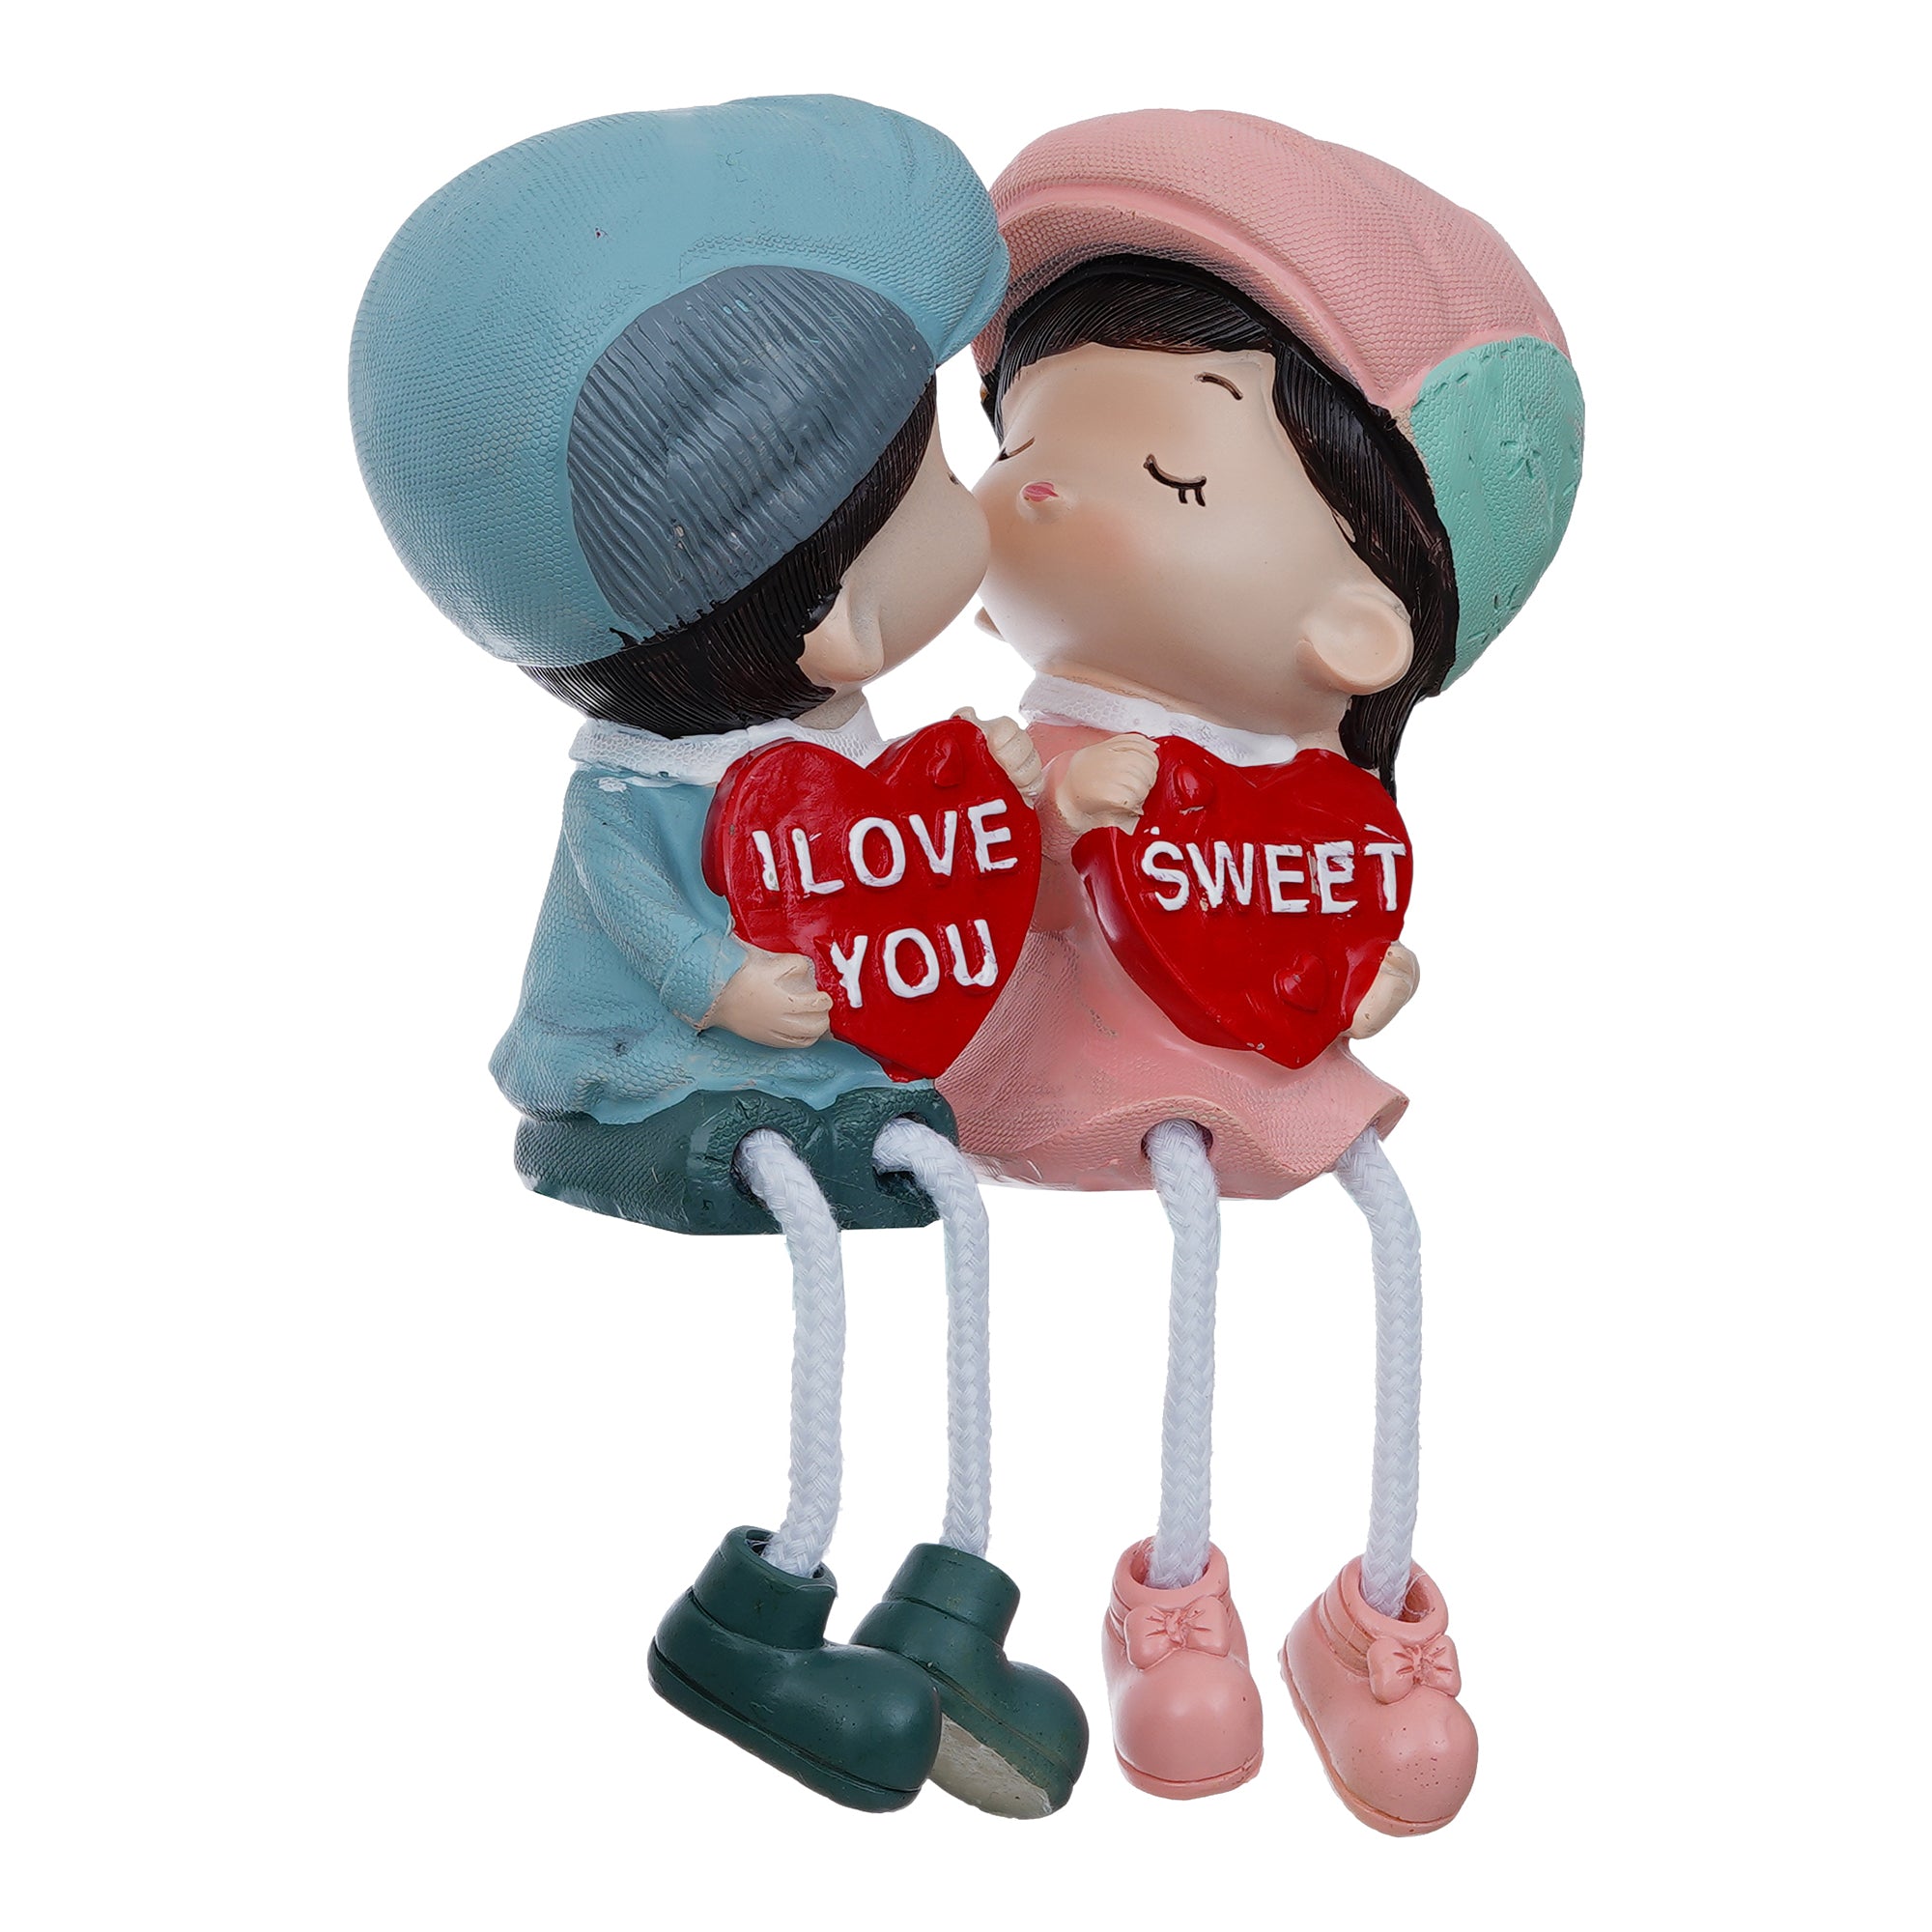 Valentine Combo of "My Heart Beats Only For You" Wooden Showpiece With Stand, Colorful Girl and Boy "Sweet I Love You" Kissing Figurine 6